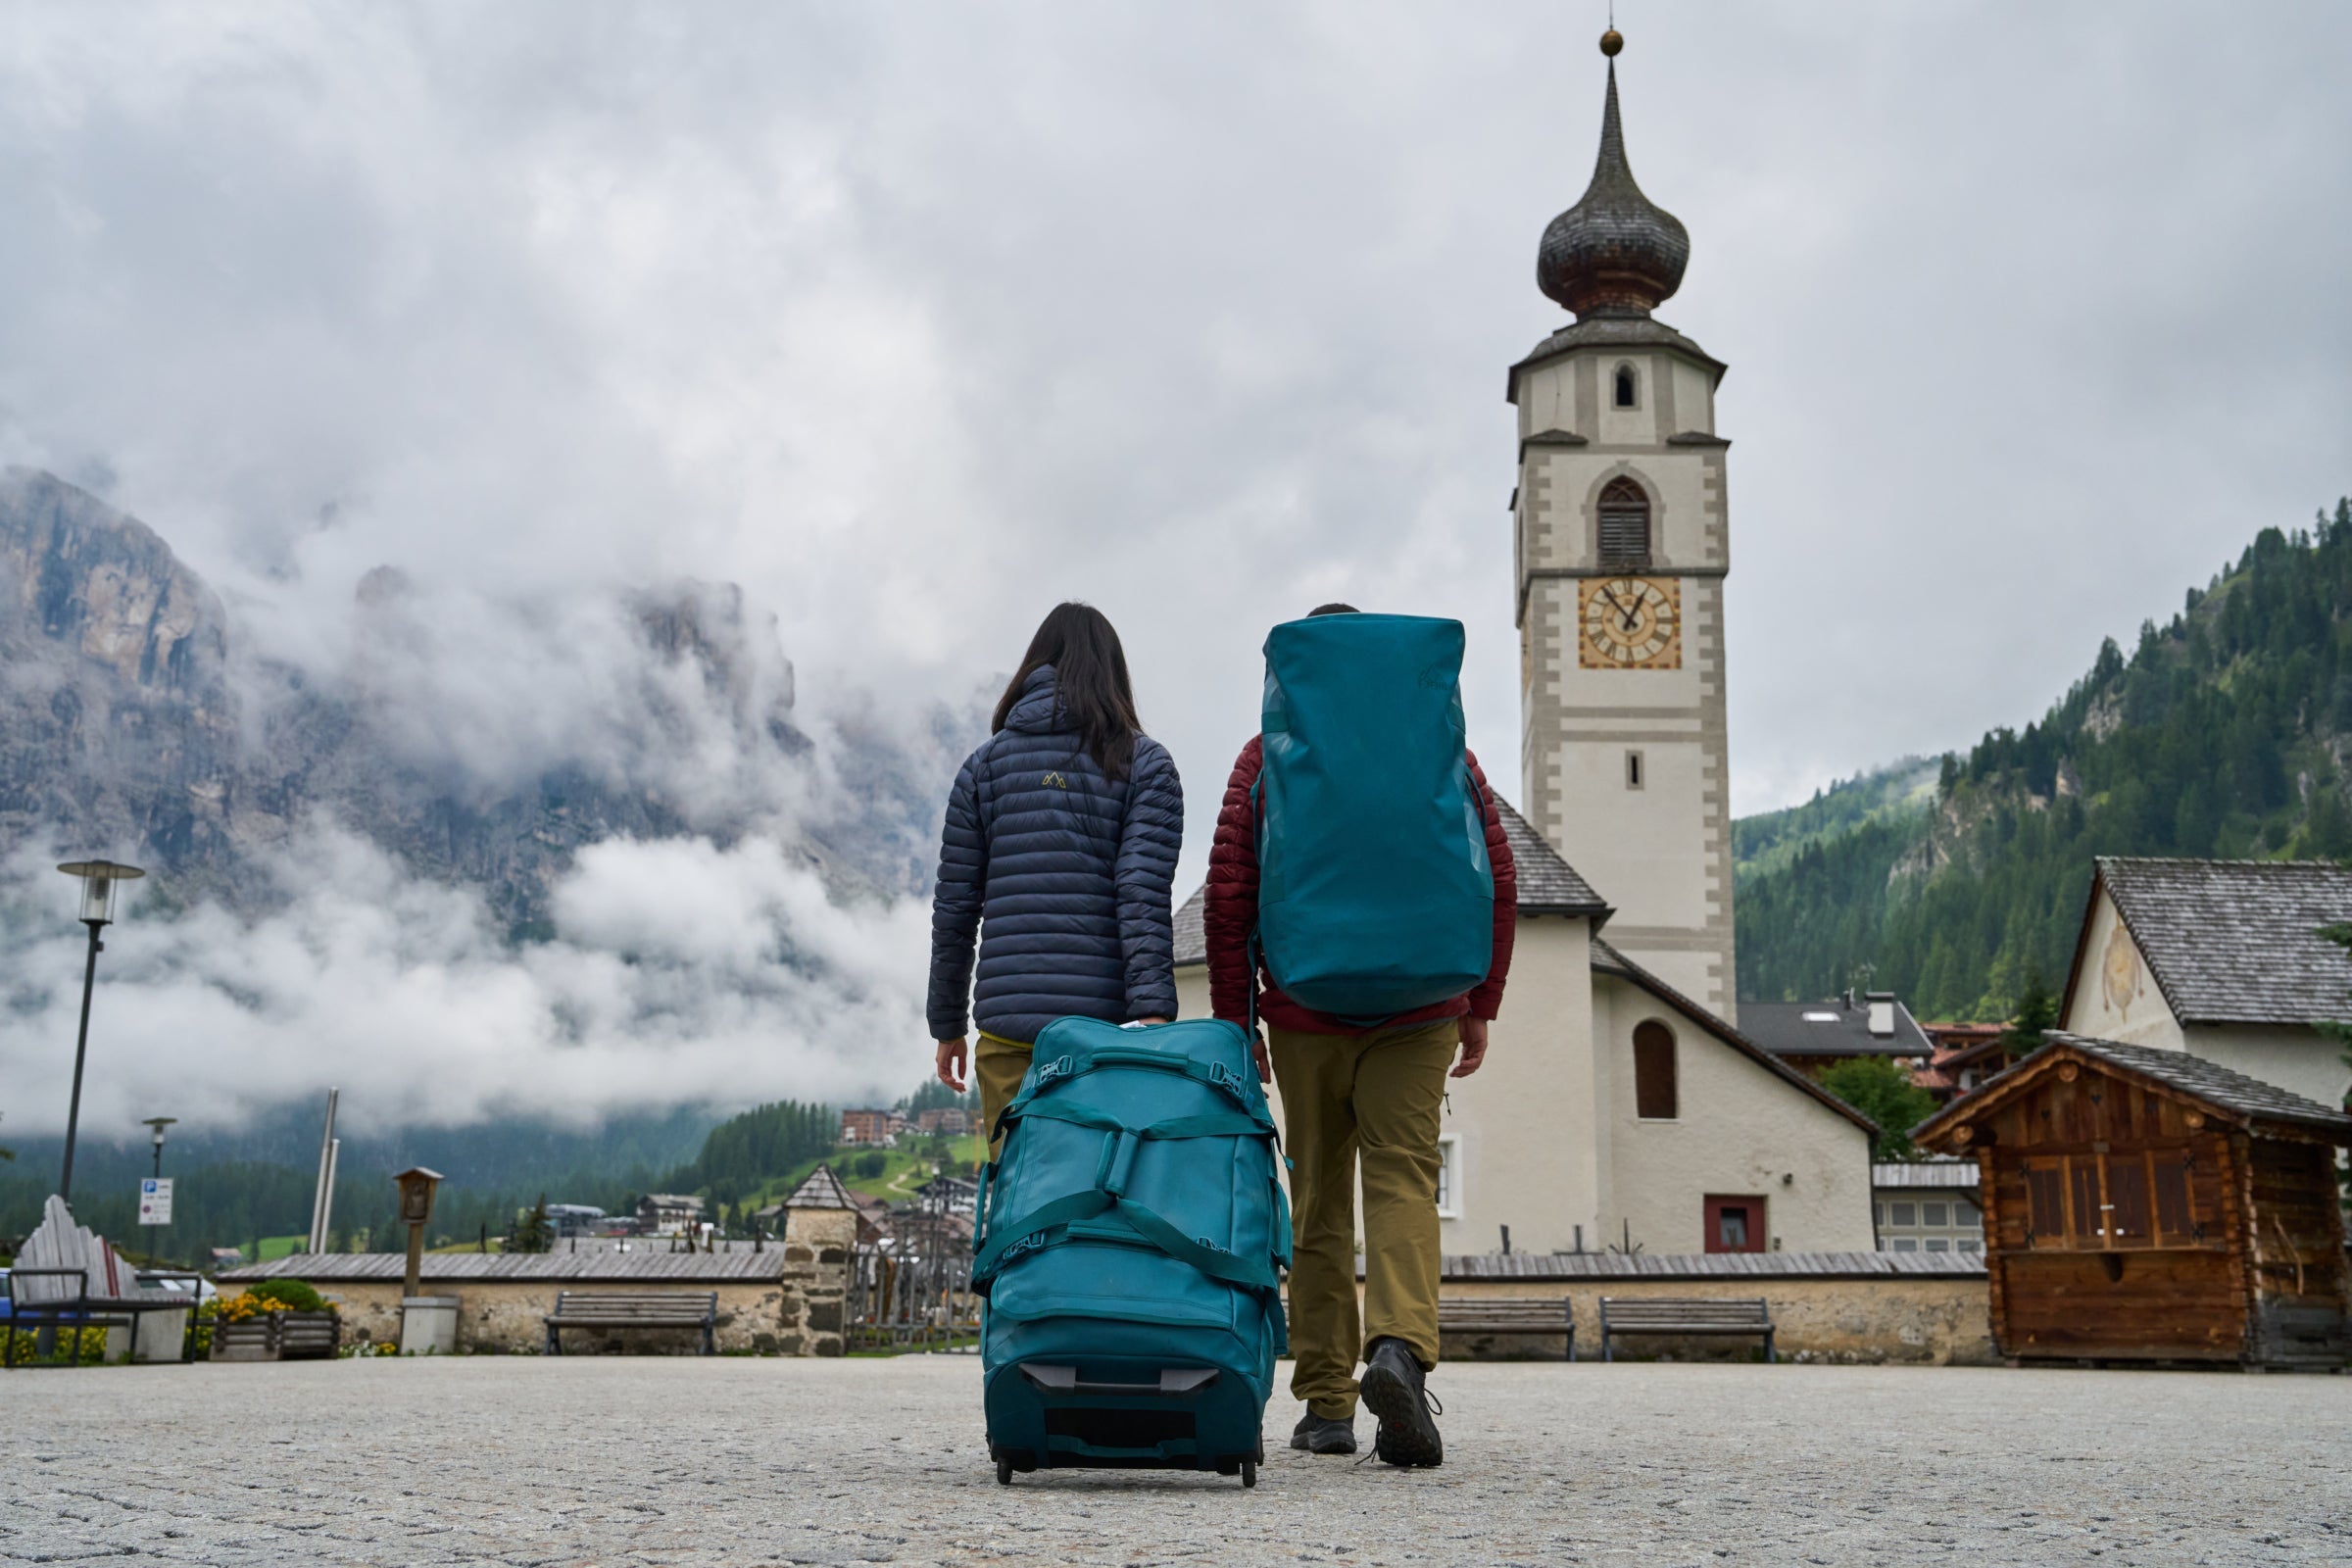 Fjern Luggage being carried through an Italian village in the Dolomites with cloudy mountains and a Church steeple in the distance